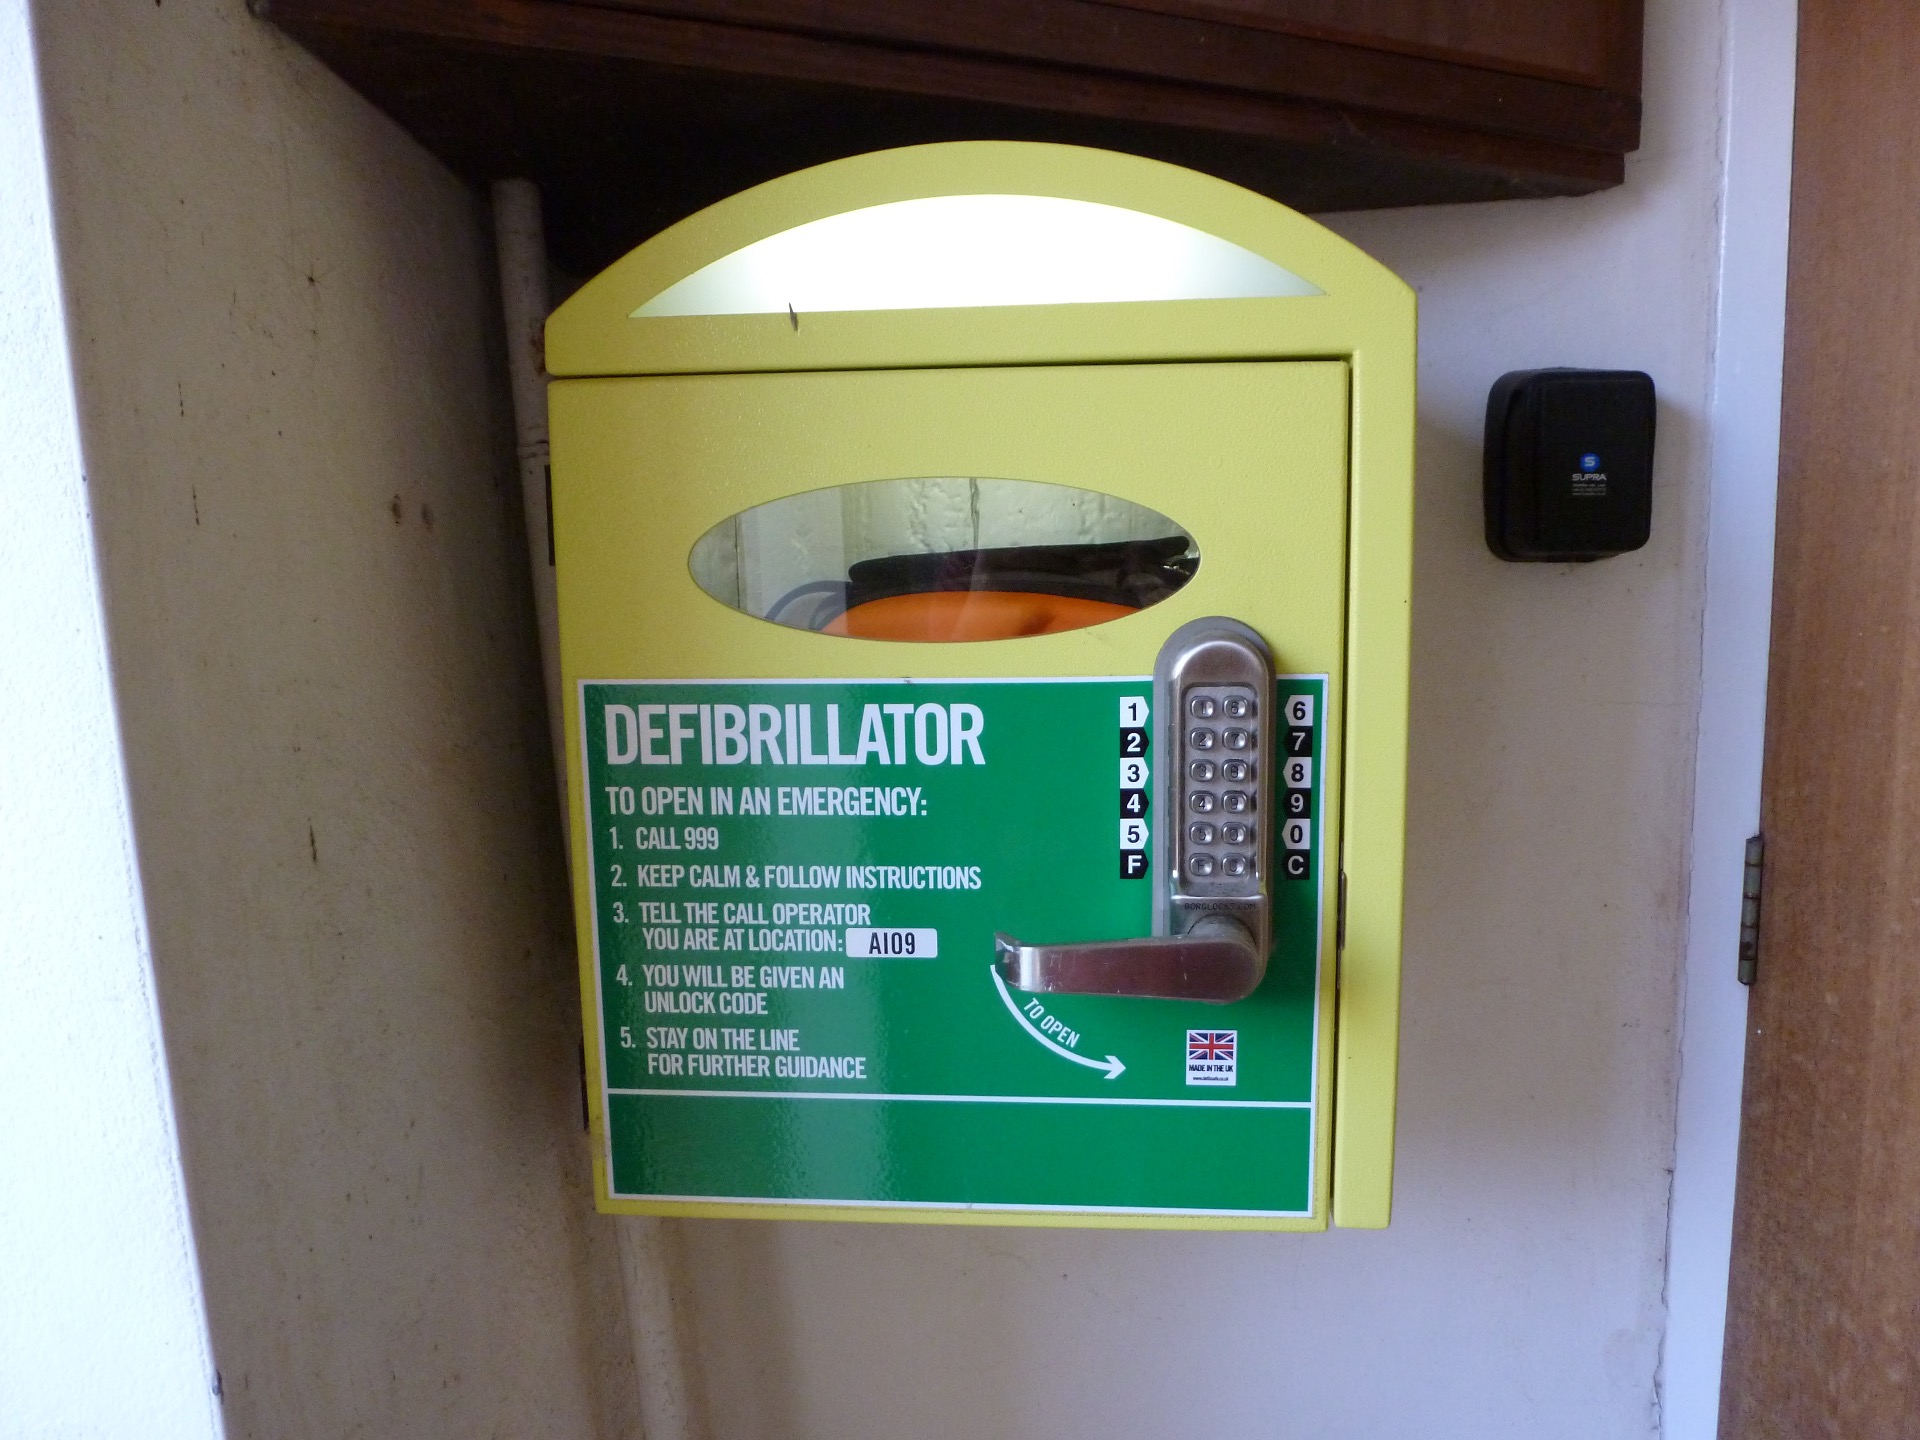 Defibrillator located in the entrance to The Institute